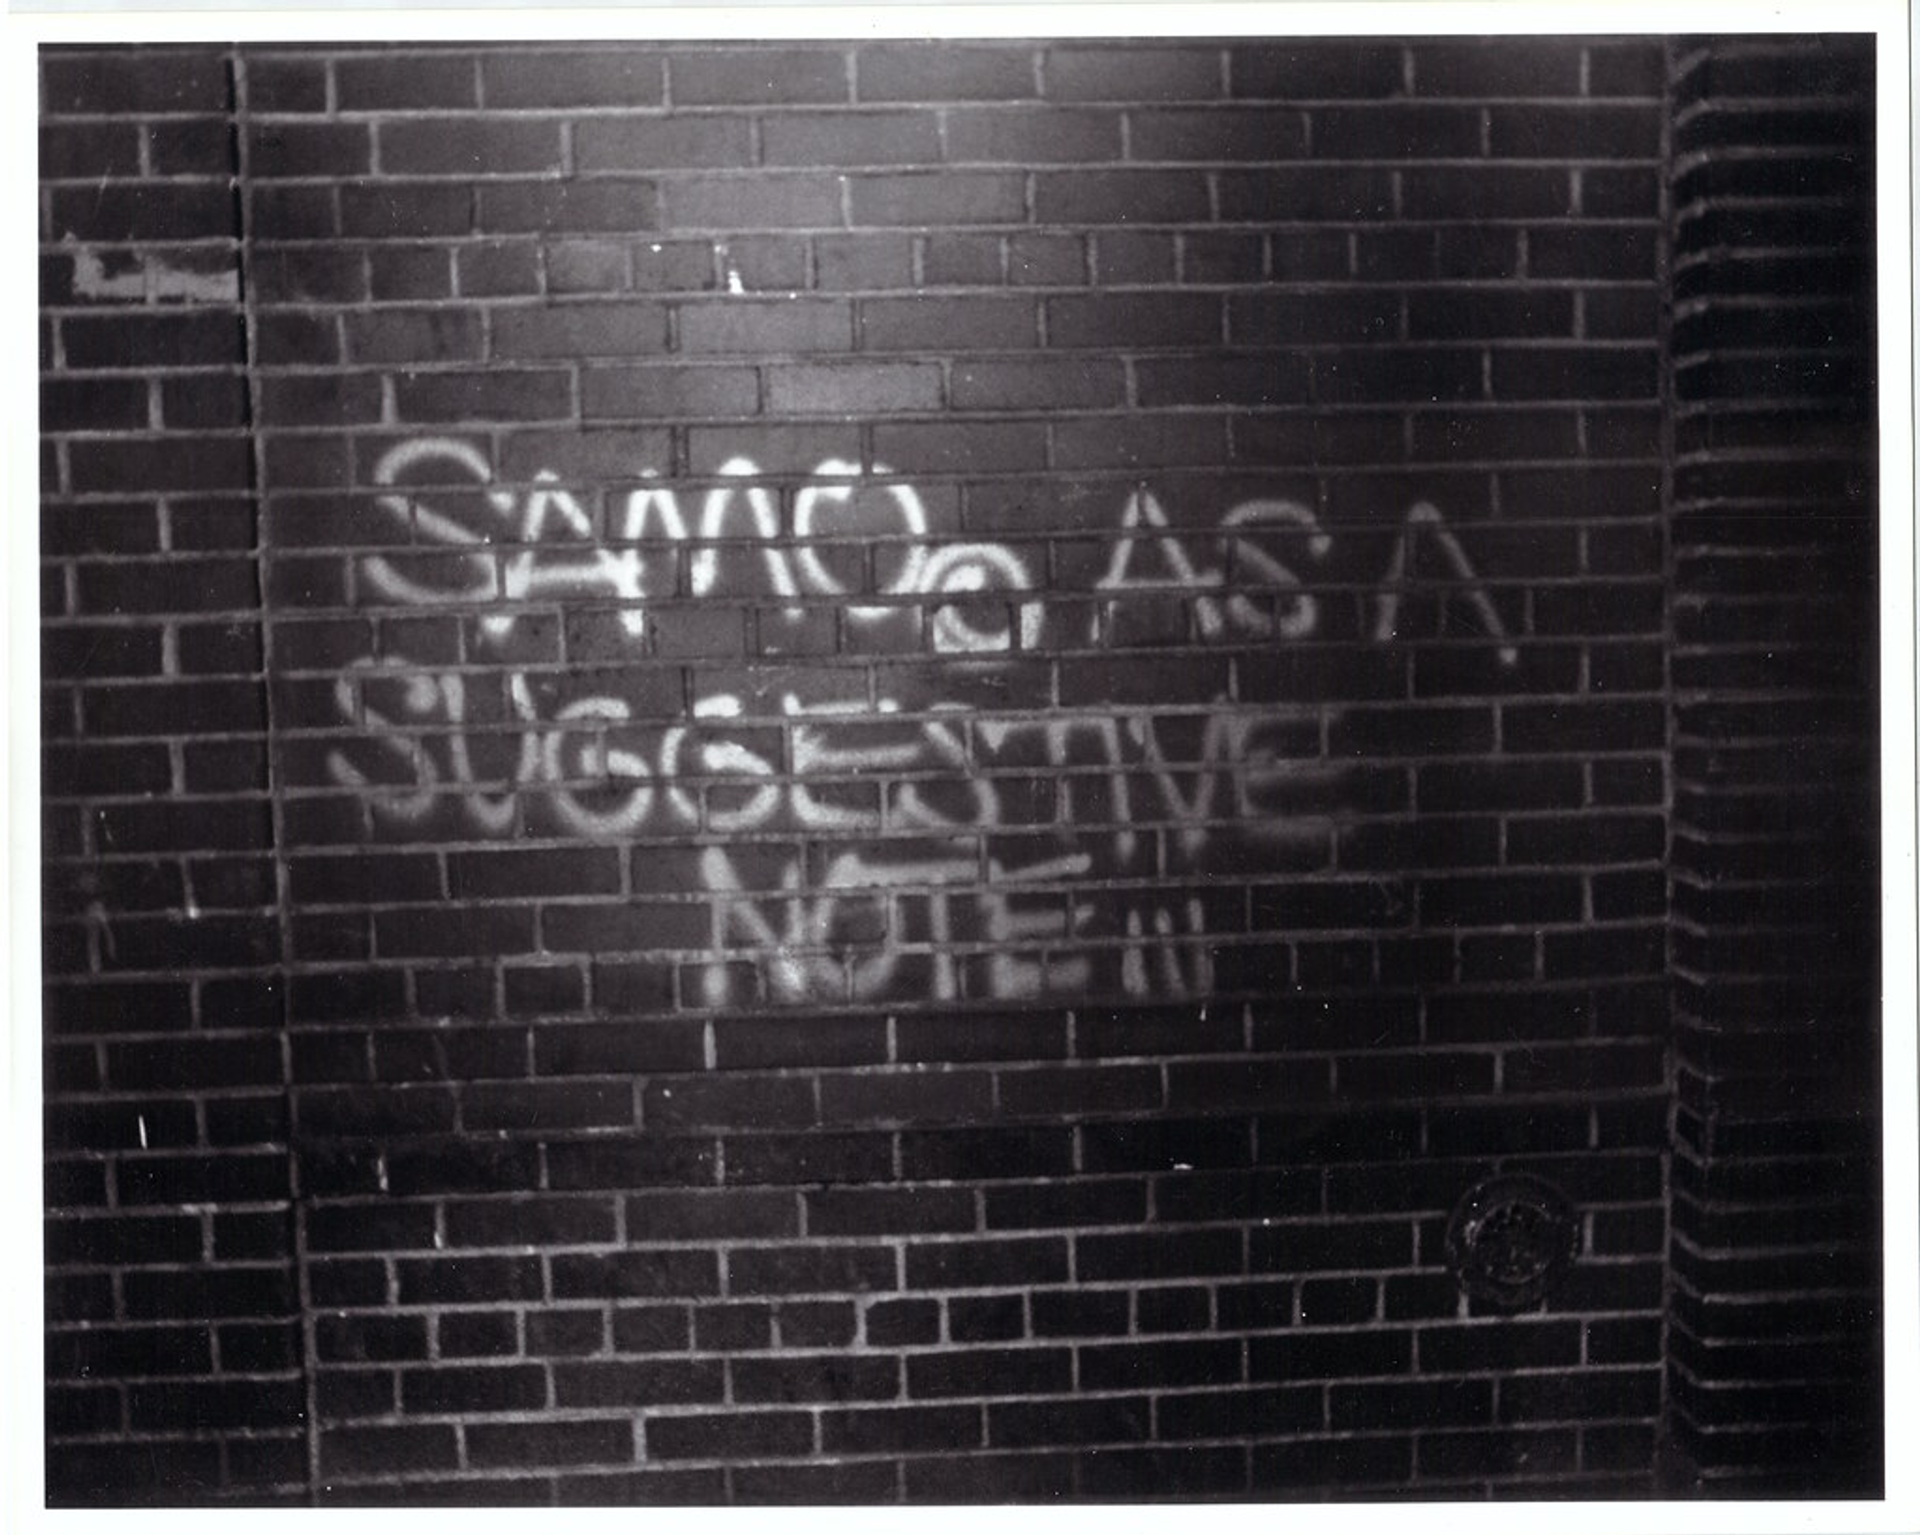 An image of graffiti by SAMO on a brick all. It reads "SAMO AS A SUGGESTIVE NOTE."